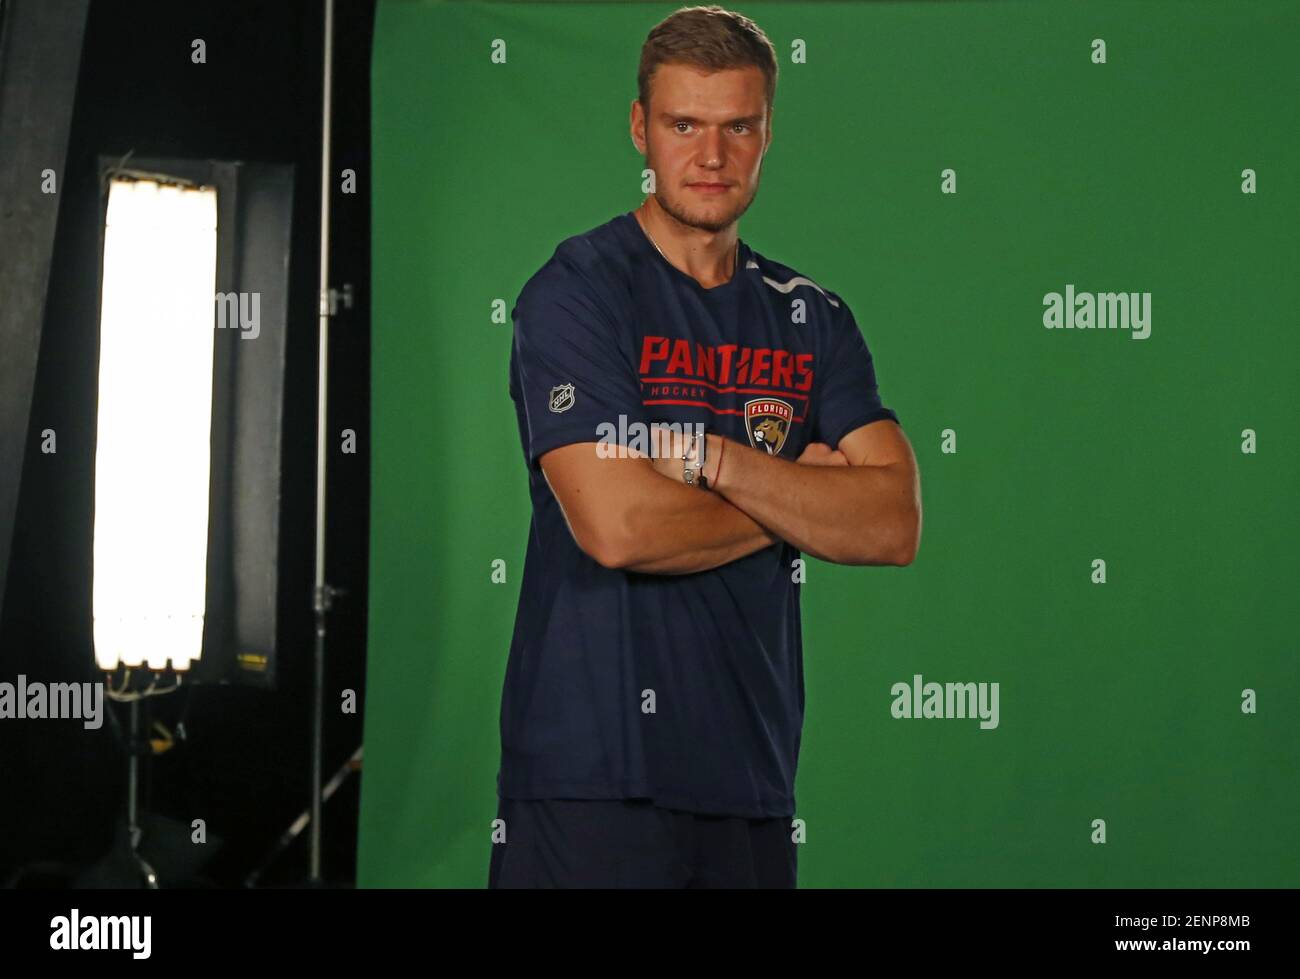 Florida Panthers center Aleksander Barkov poses for the Panthers productions crew during media day at the BB&T Center on Sept. 12, 2019 in Sunrise, Fla. (Photo by David Santiago/Miami Herald/TNS/Sipa USA) Stock Photo